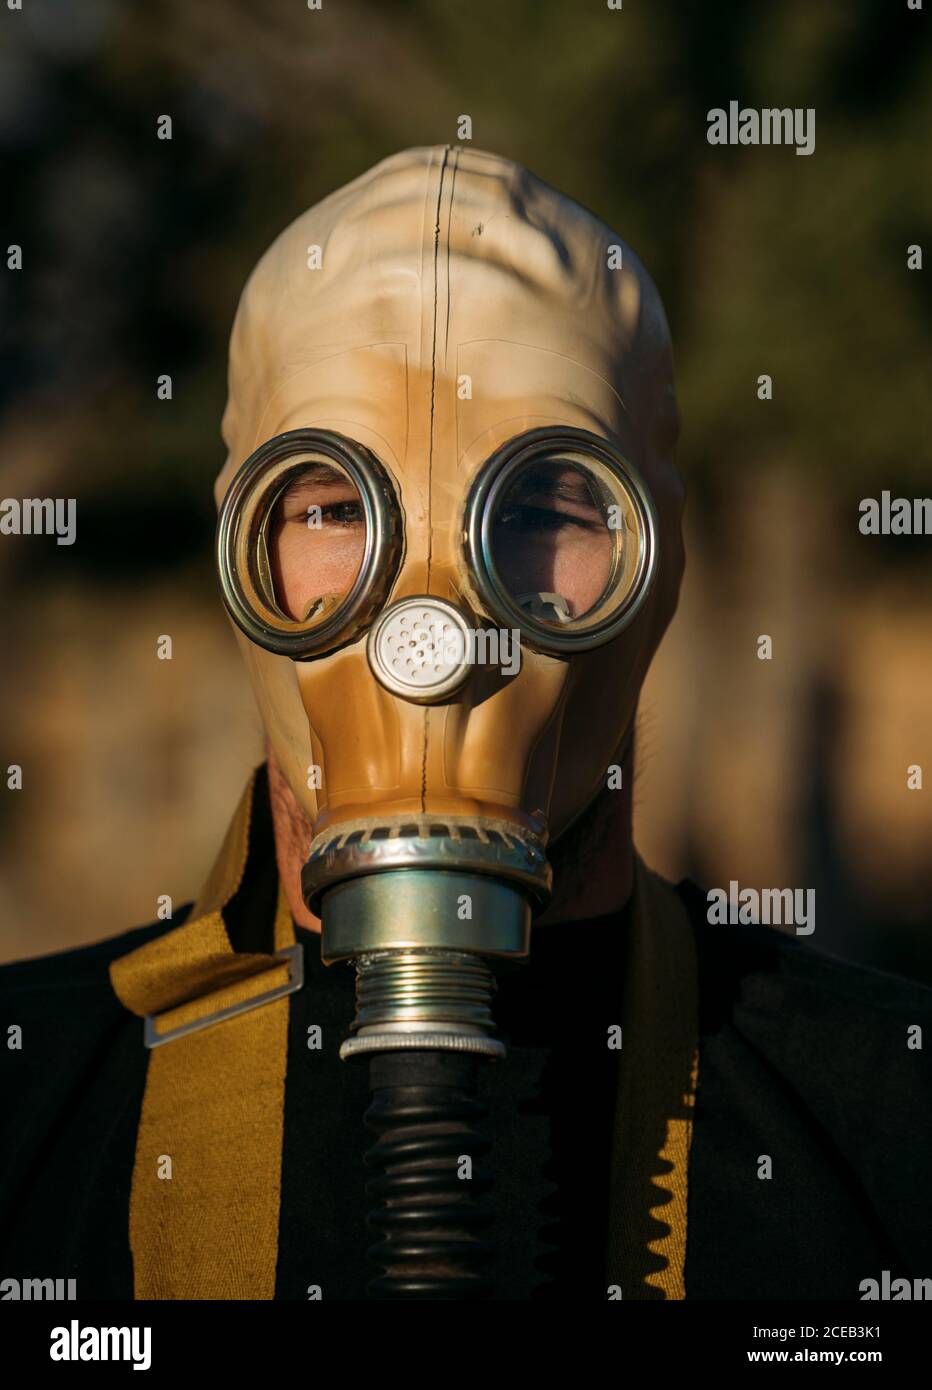 man with tear gas mask Stock Photo